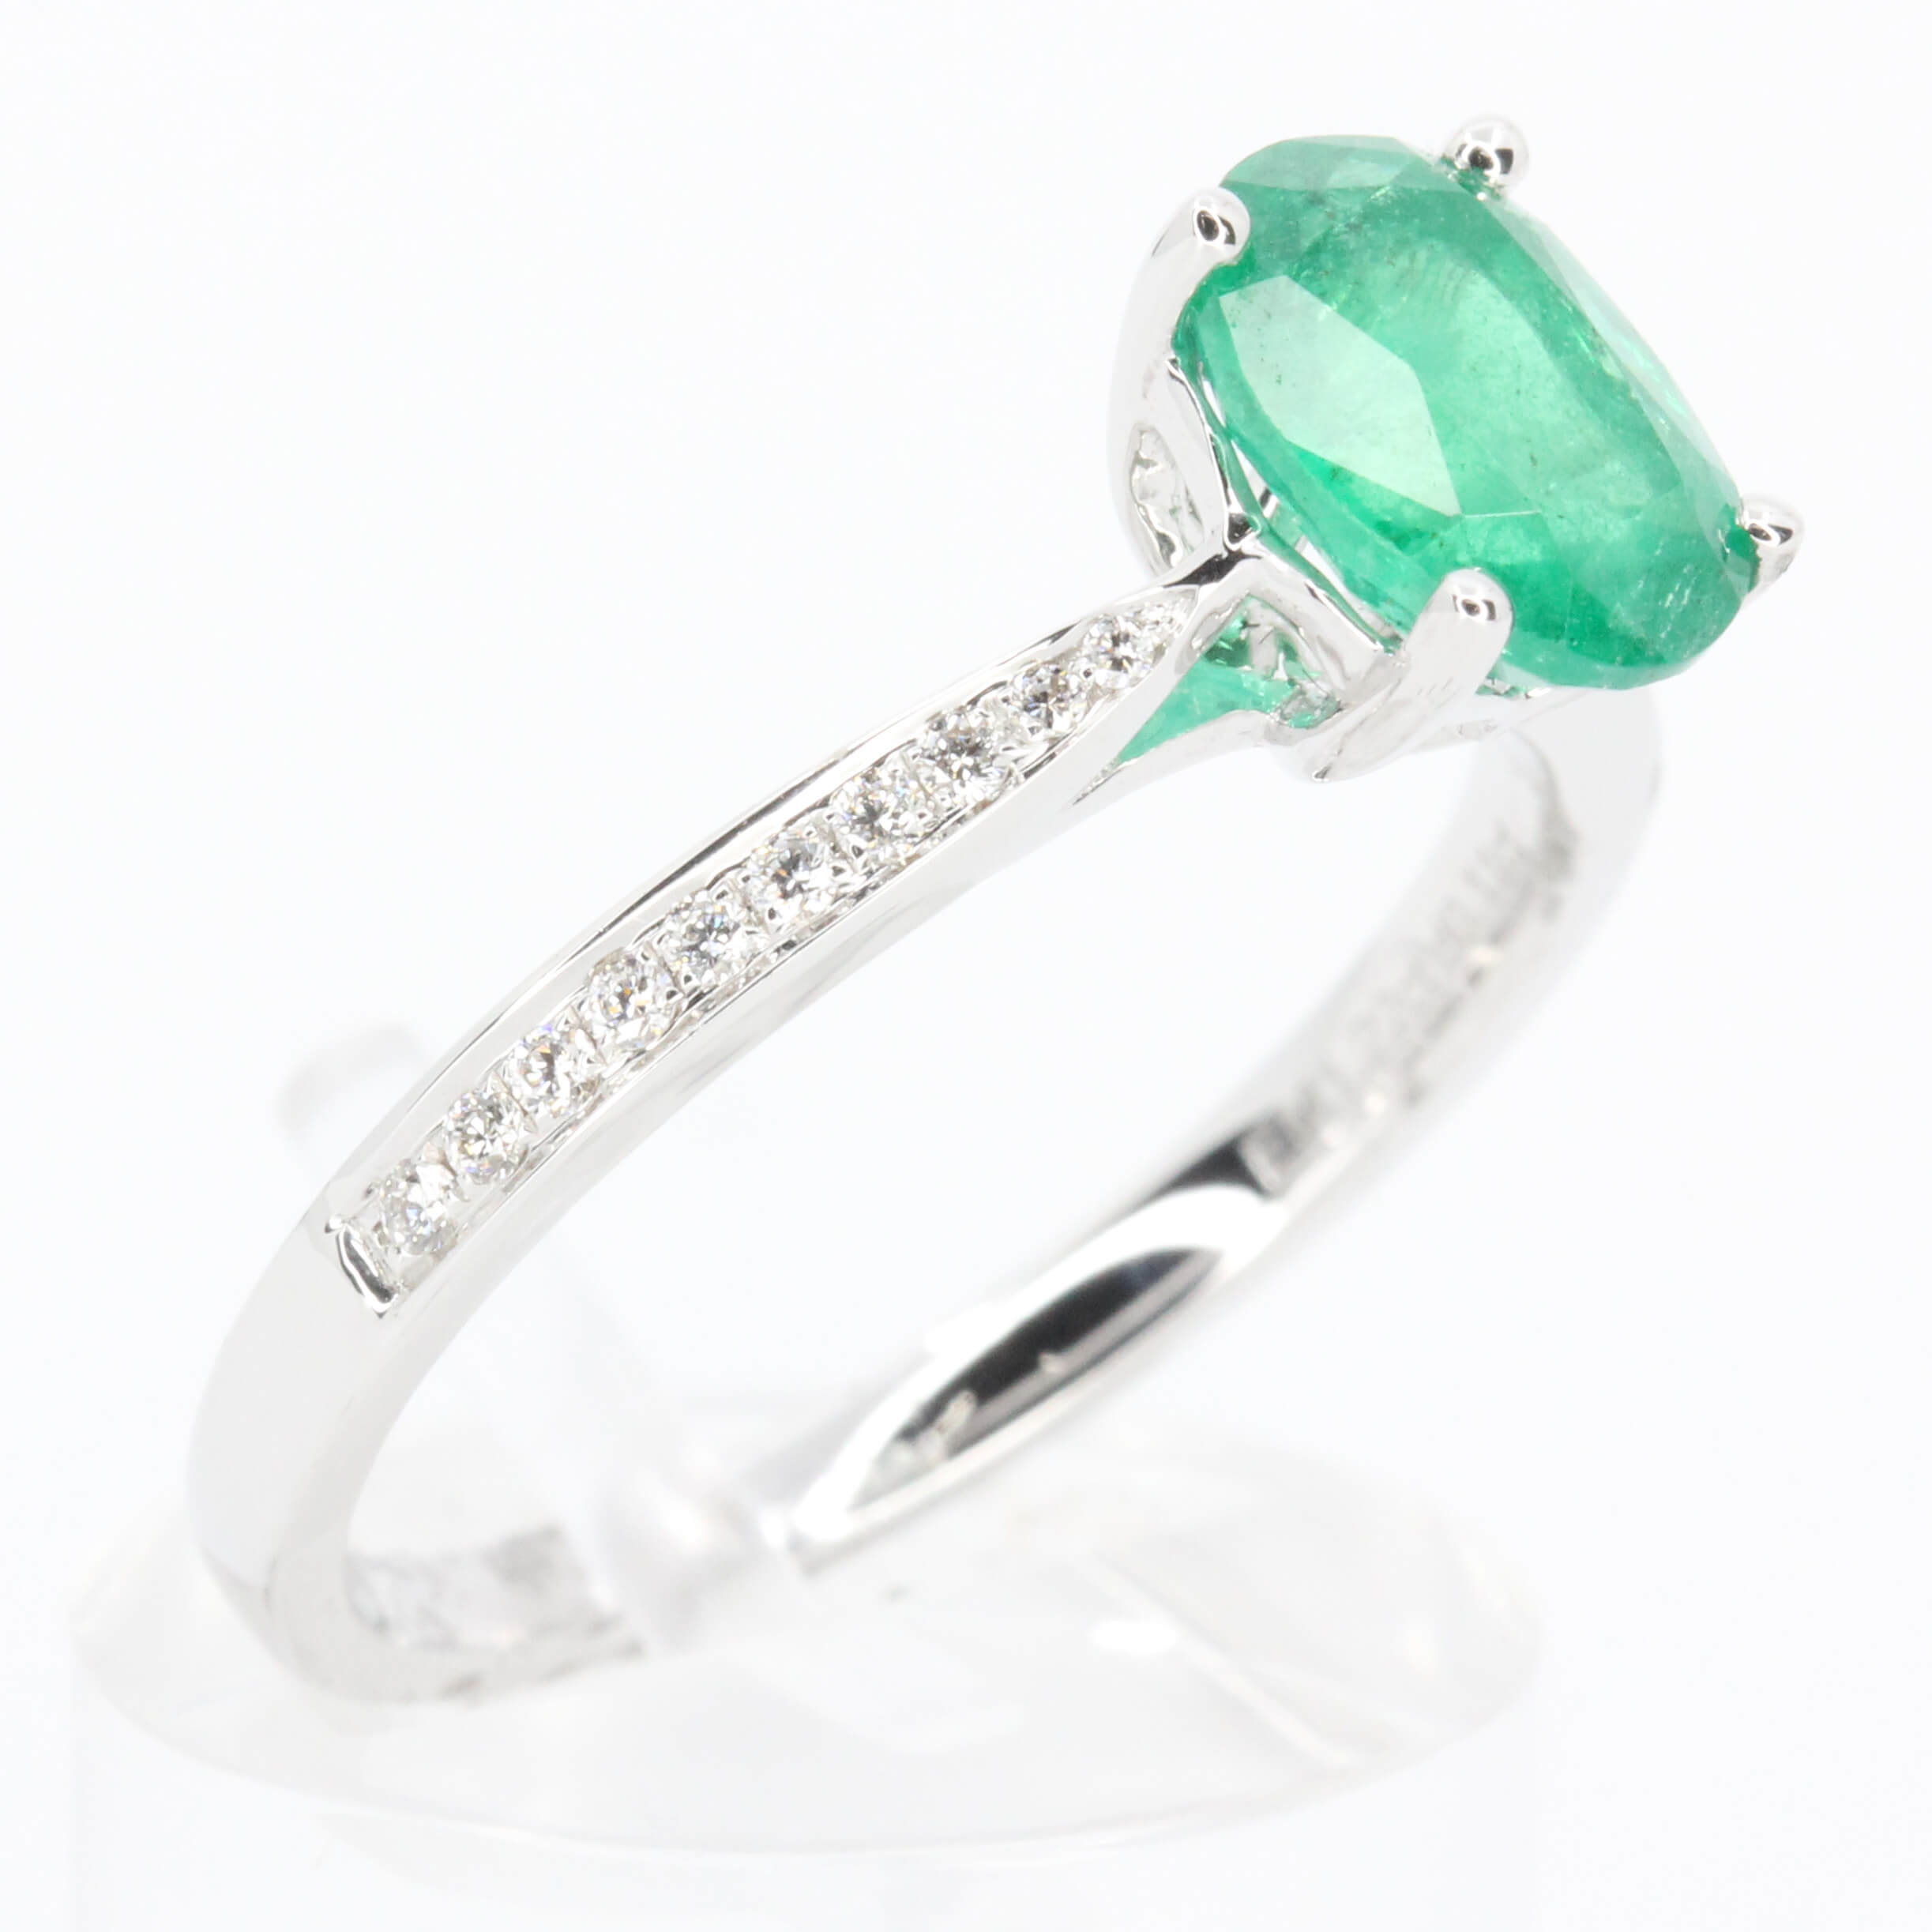 18ct White Gold Emerald and Diamonds Ring | Allgem Jewellers